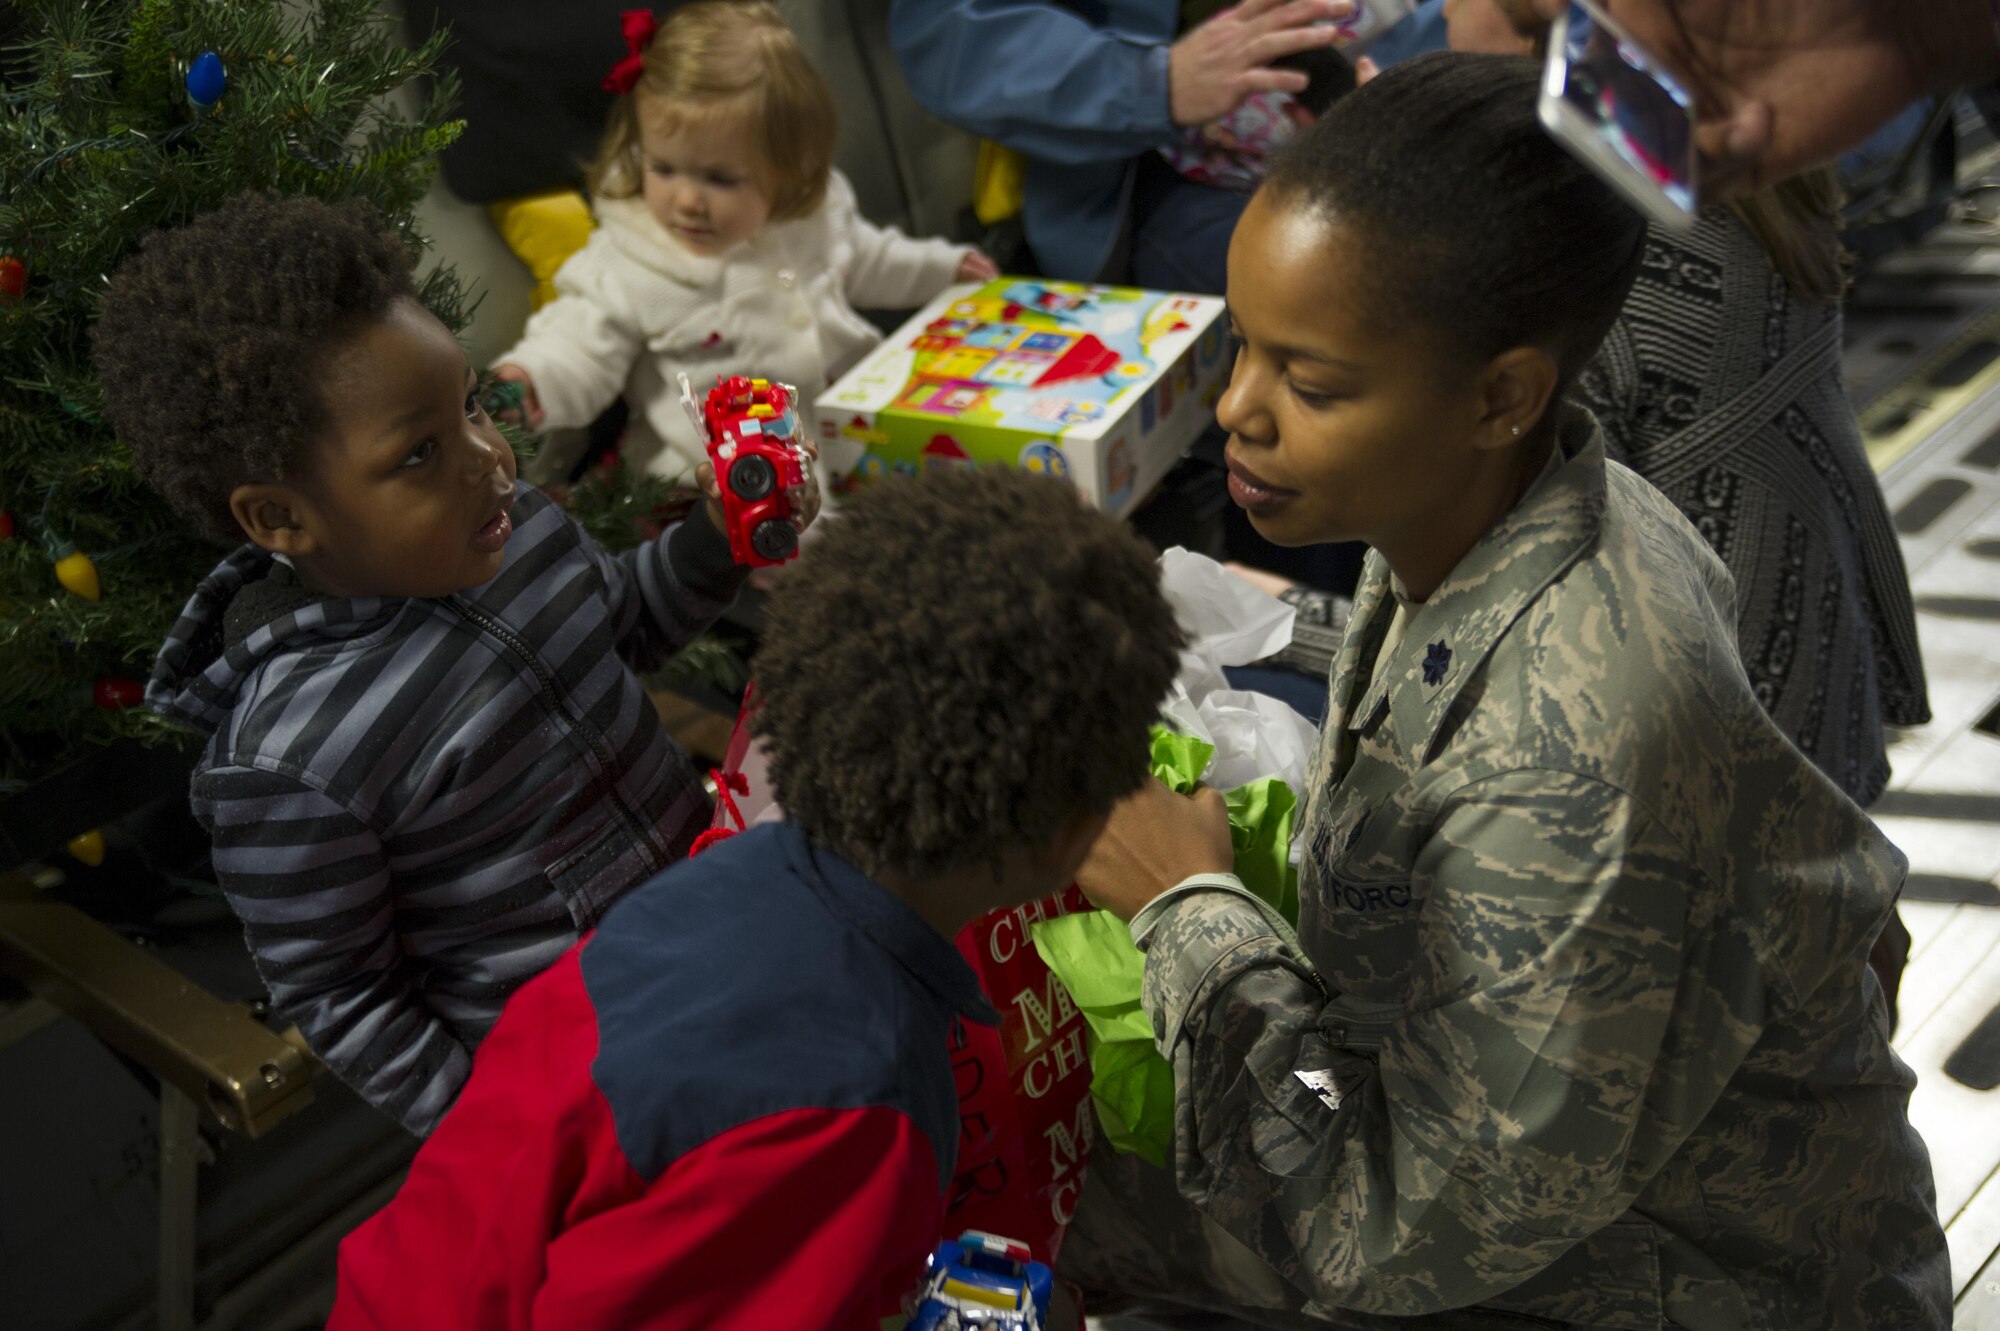 Members of the 315th Operations Group, along with their family and friends, enjoy a visit from Santa Claus Dec. 3, 2016 at Joint Base Charleston, South Carolina. The event was part of an annual holiday gathering aimed at boosting morale and family wellness (U.S. Air Force photo by Senior Airman Jonathan Lane).